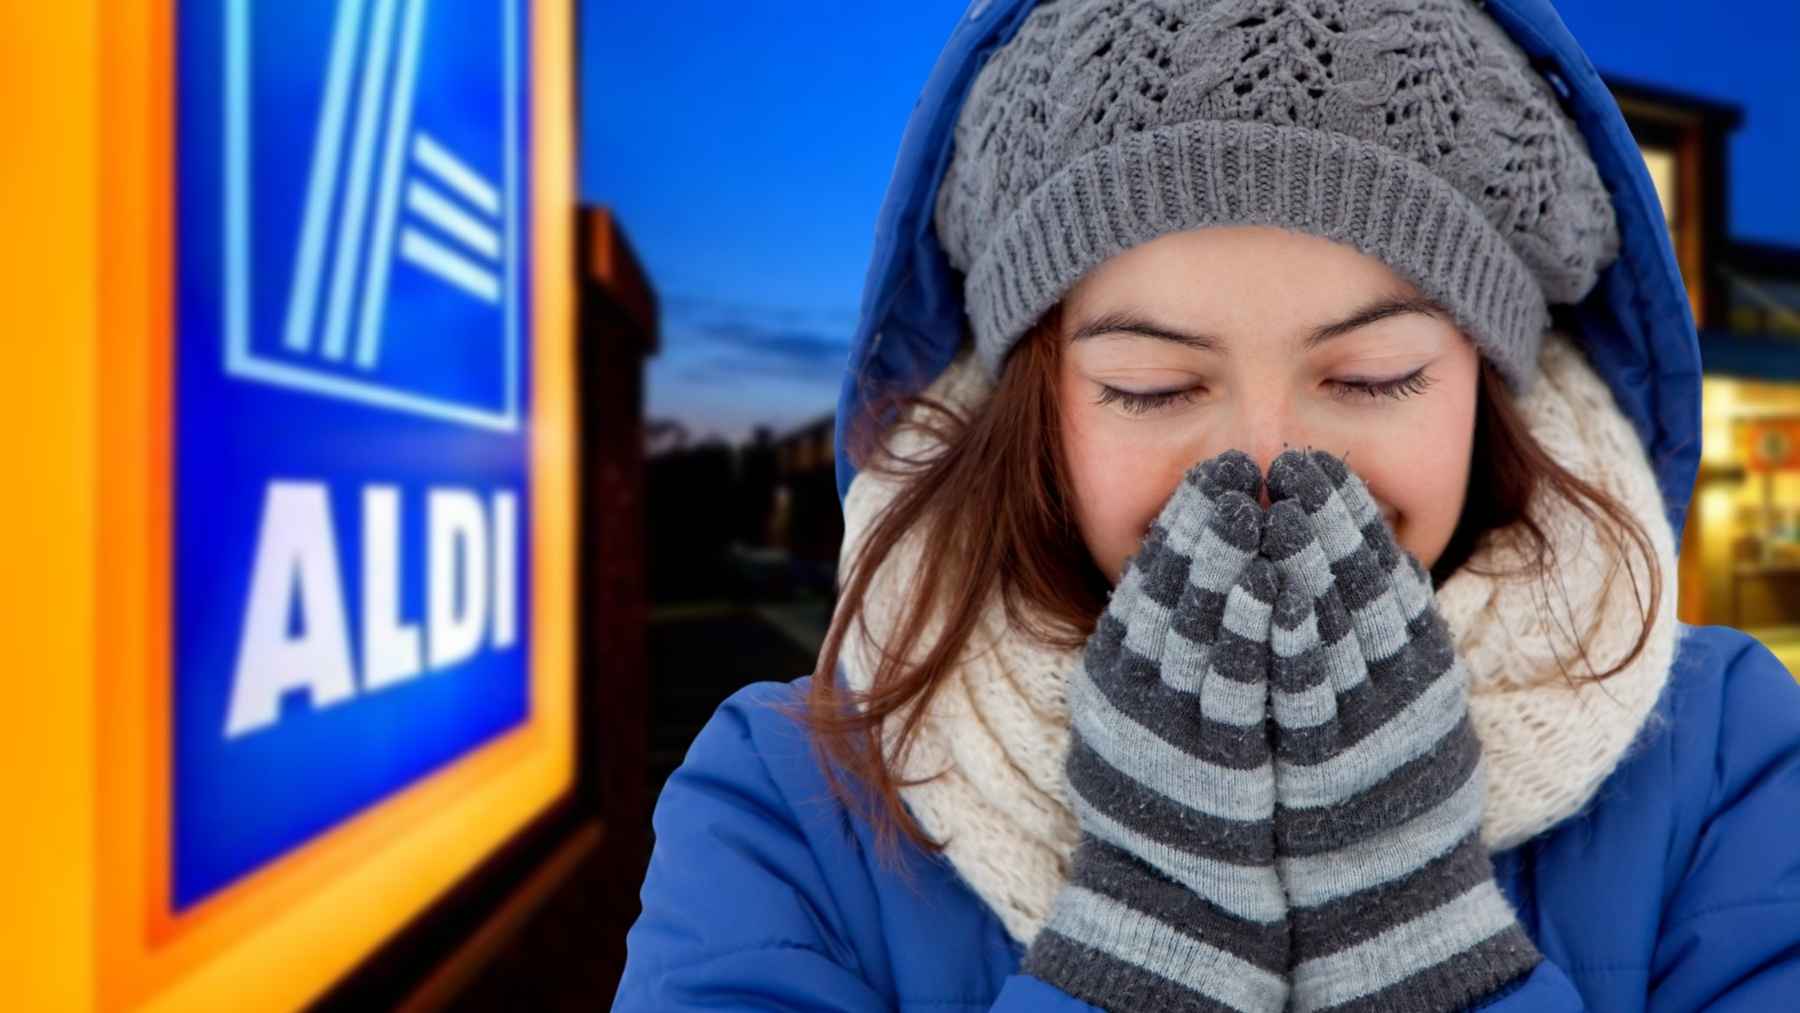 ALDI makes Zara angry: jackets and gloves for the winter at ridiculous  prices